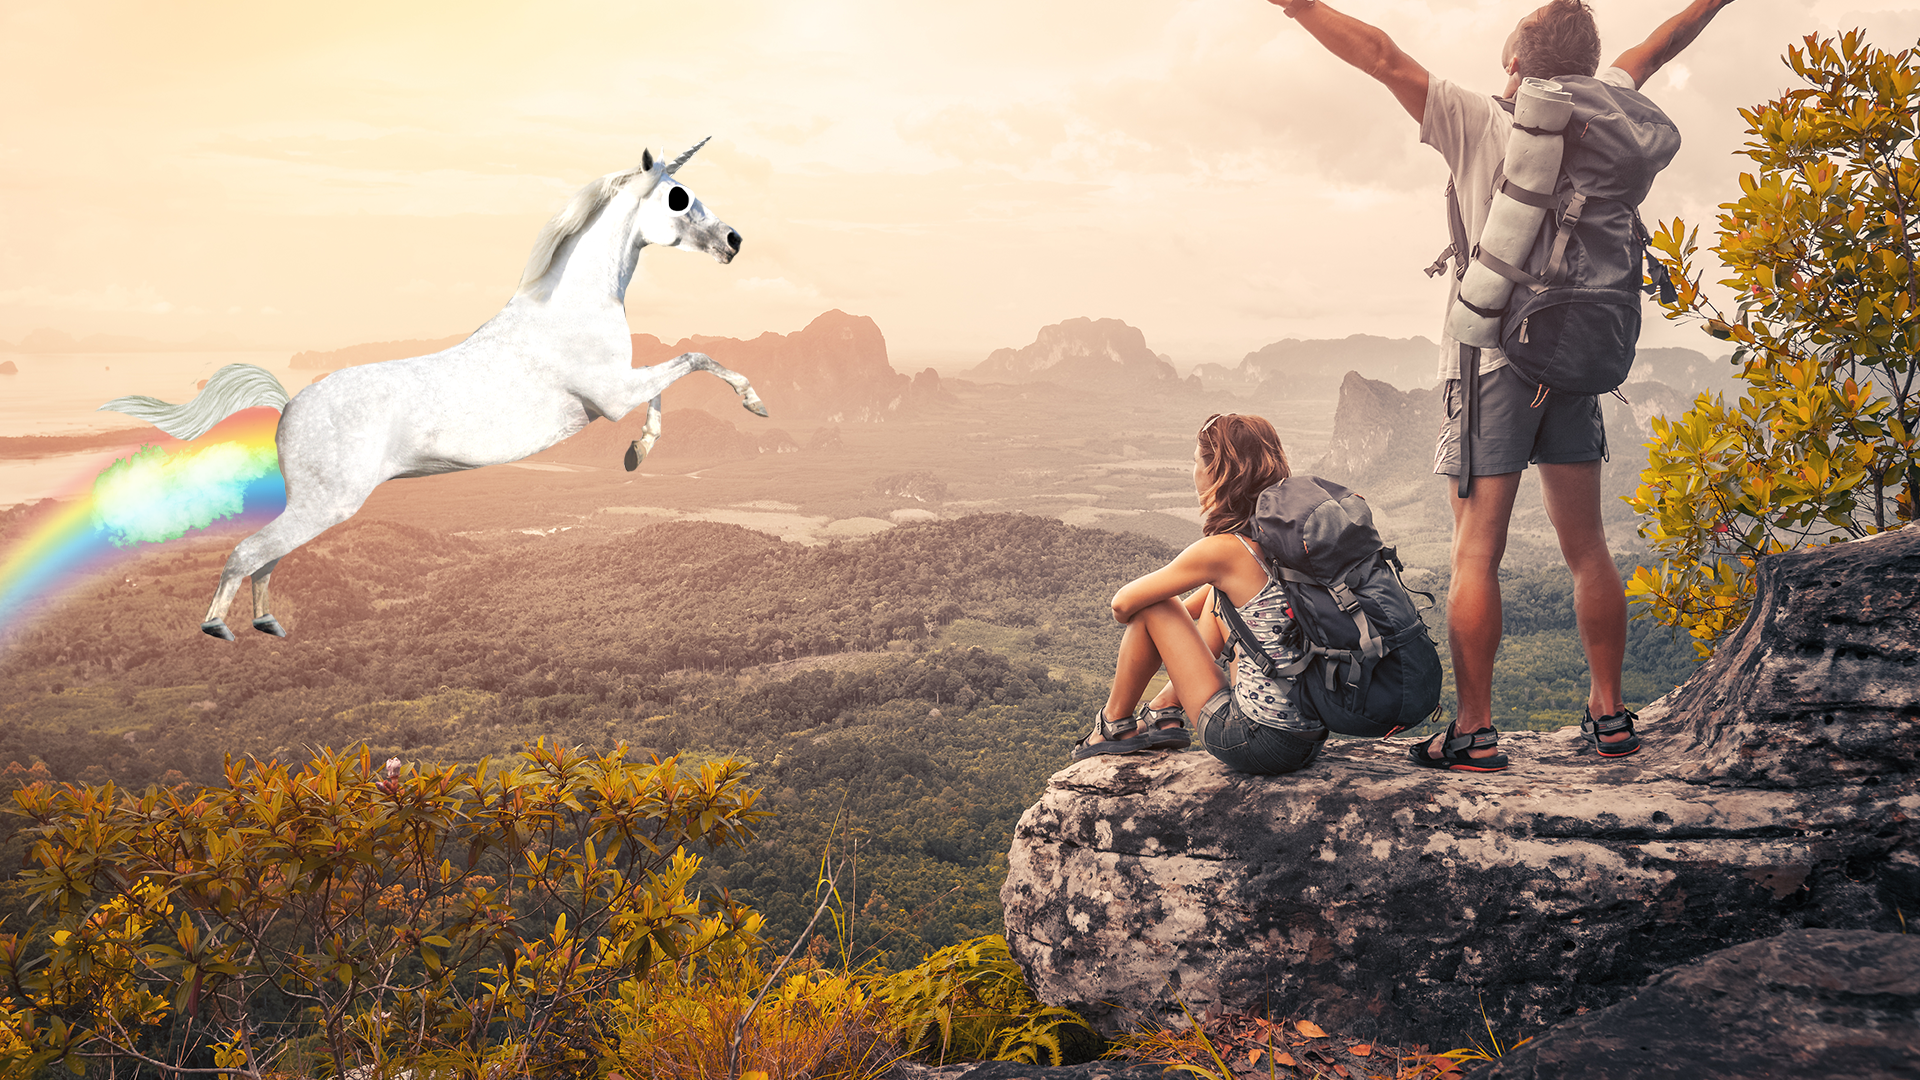 Two hikers looking at mountain scene with flying unicorn